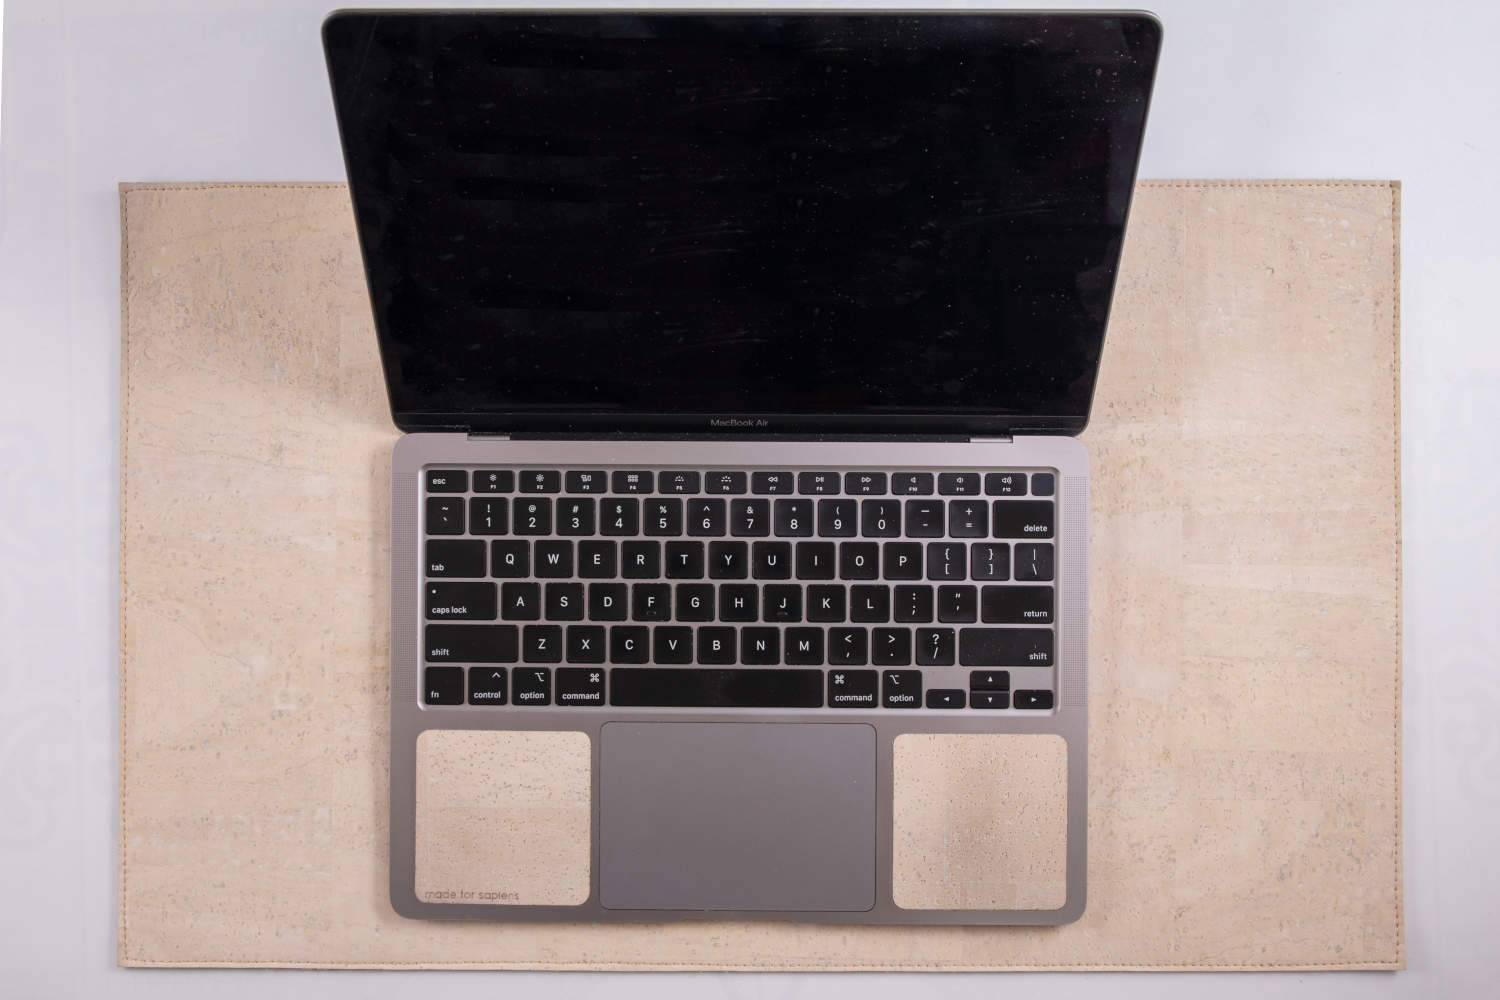 Overhead view of 13-inch Macbook on white cork leather laptop desk pad